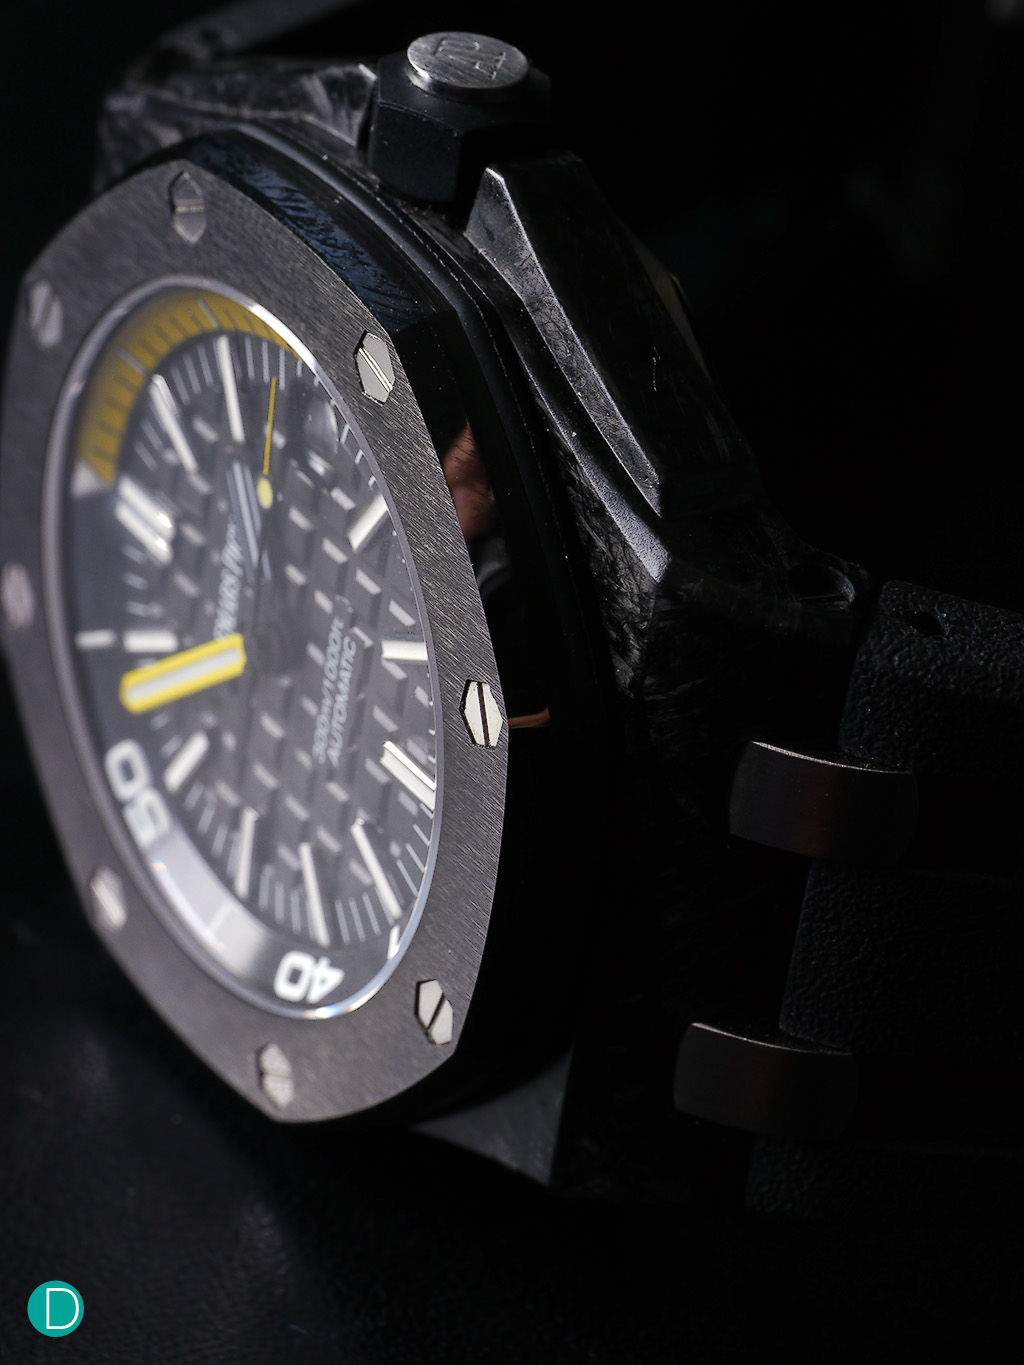 The Audemars Piguet Offshore Diver, in forged carbon.